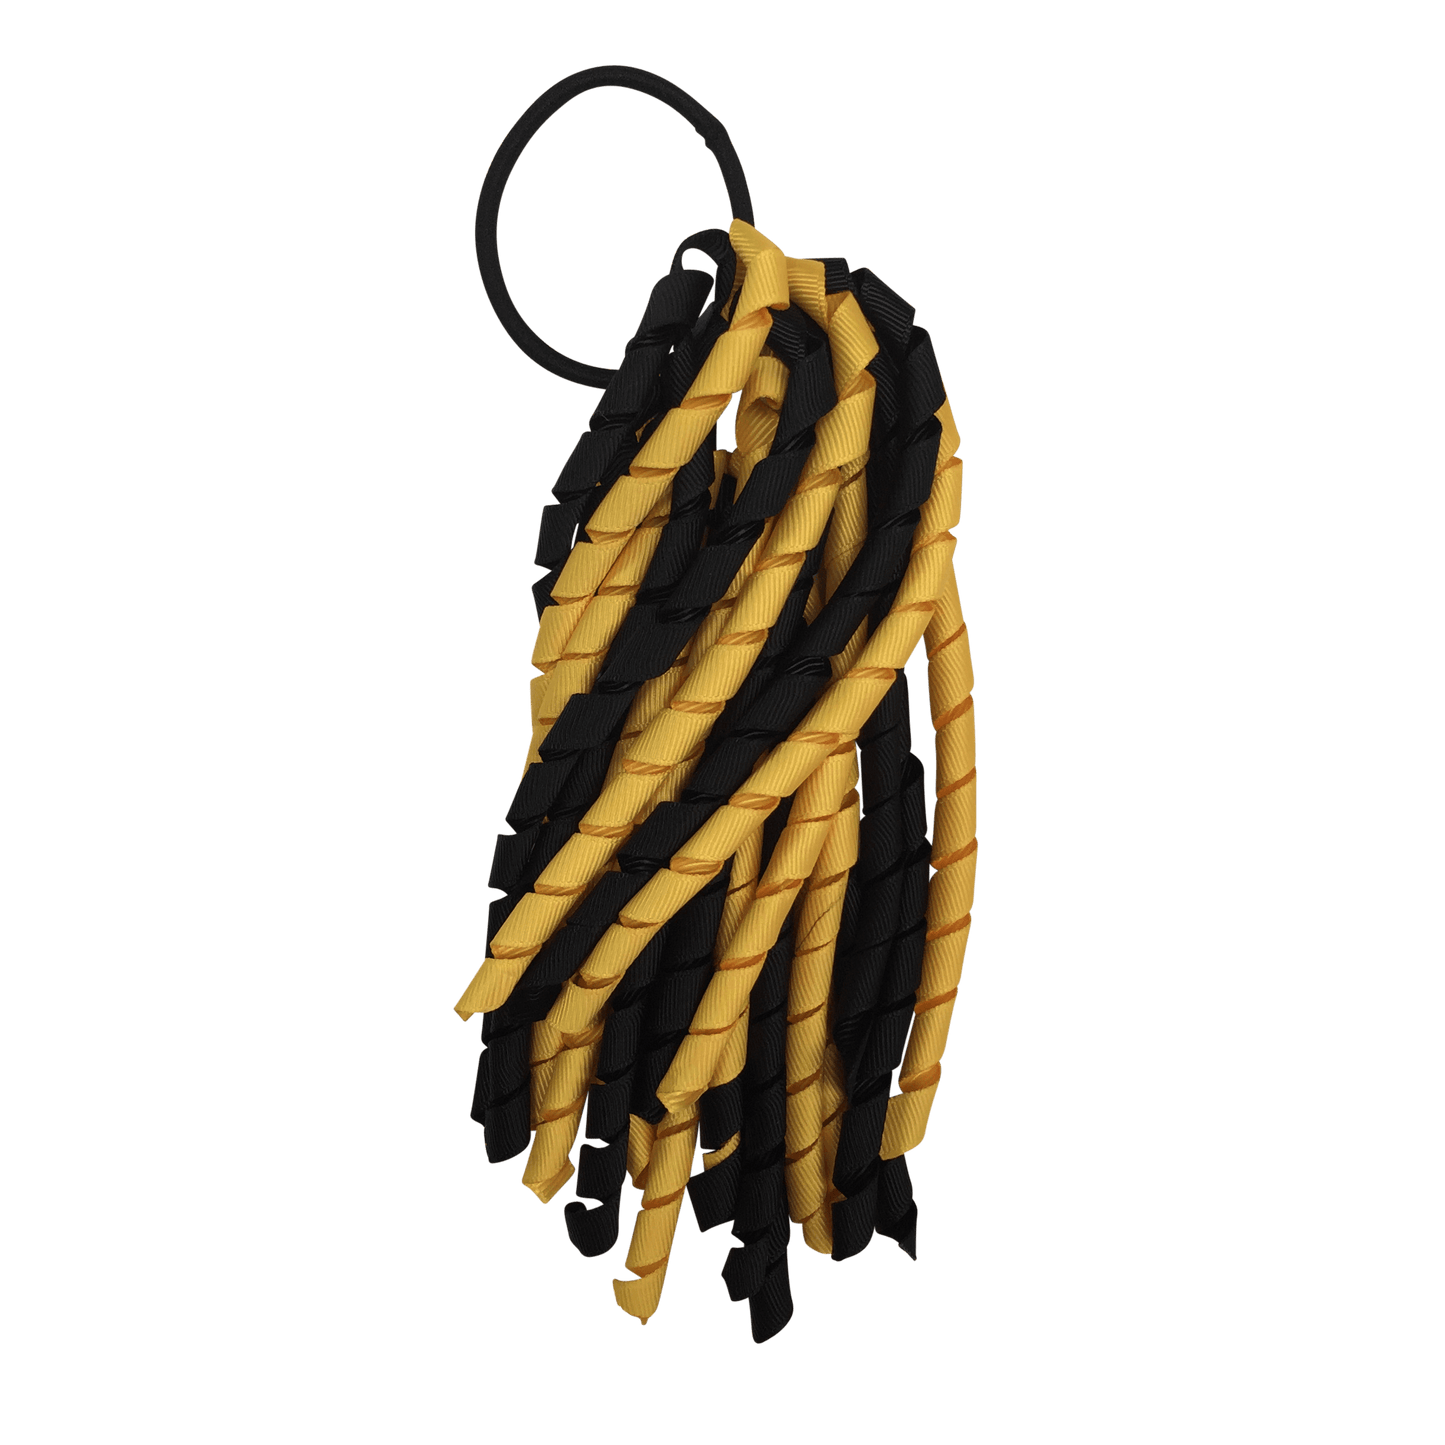 Yellow & Black Hair Accessories - Ponytails and Fairytales